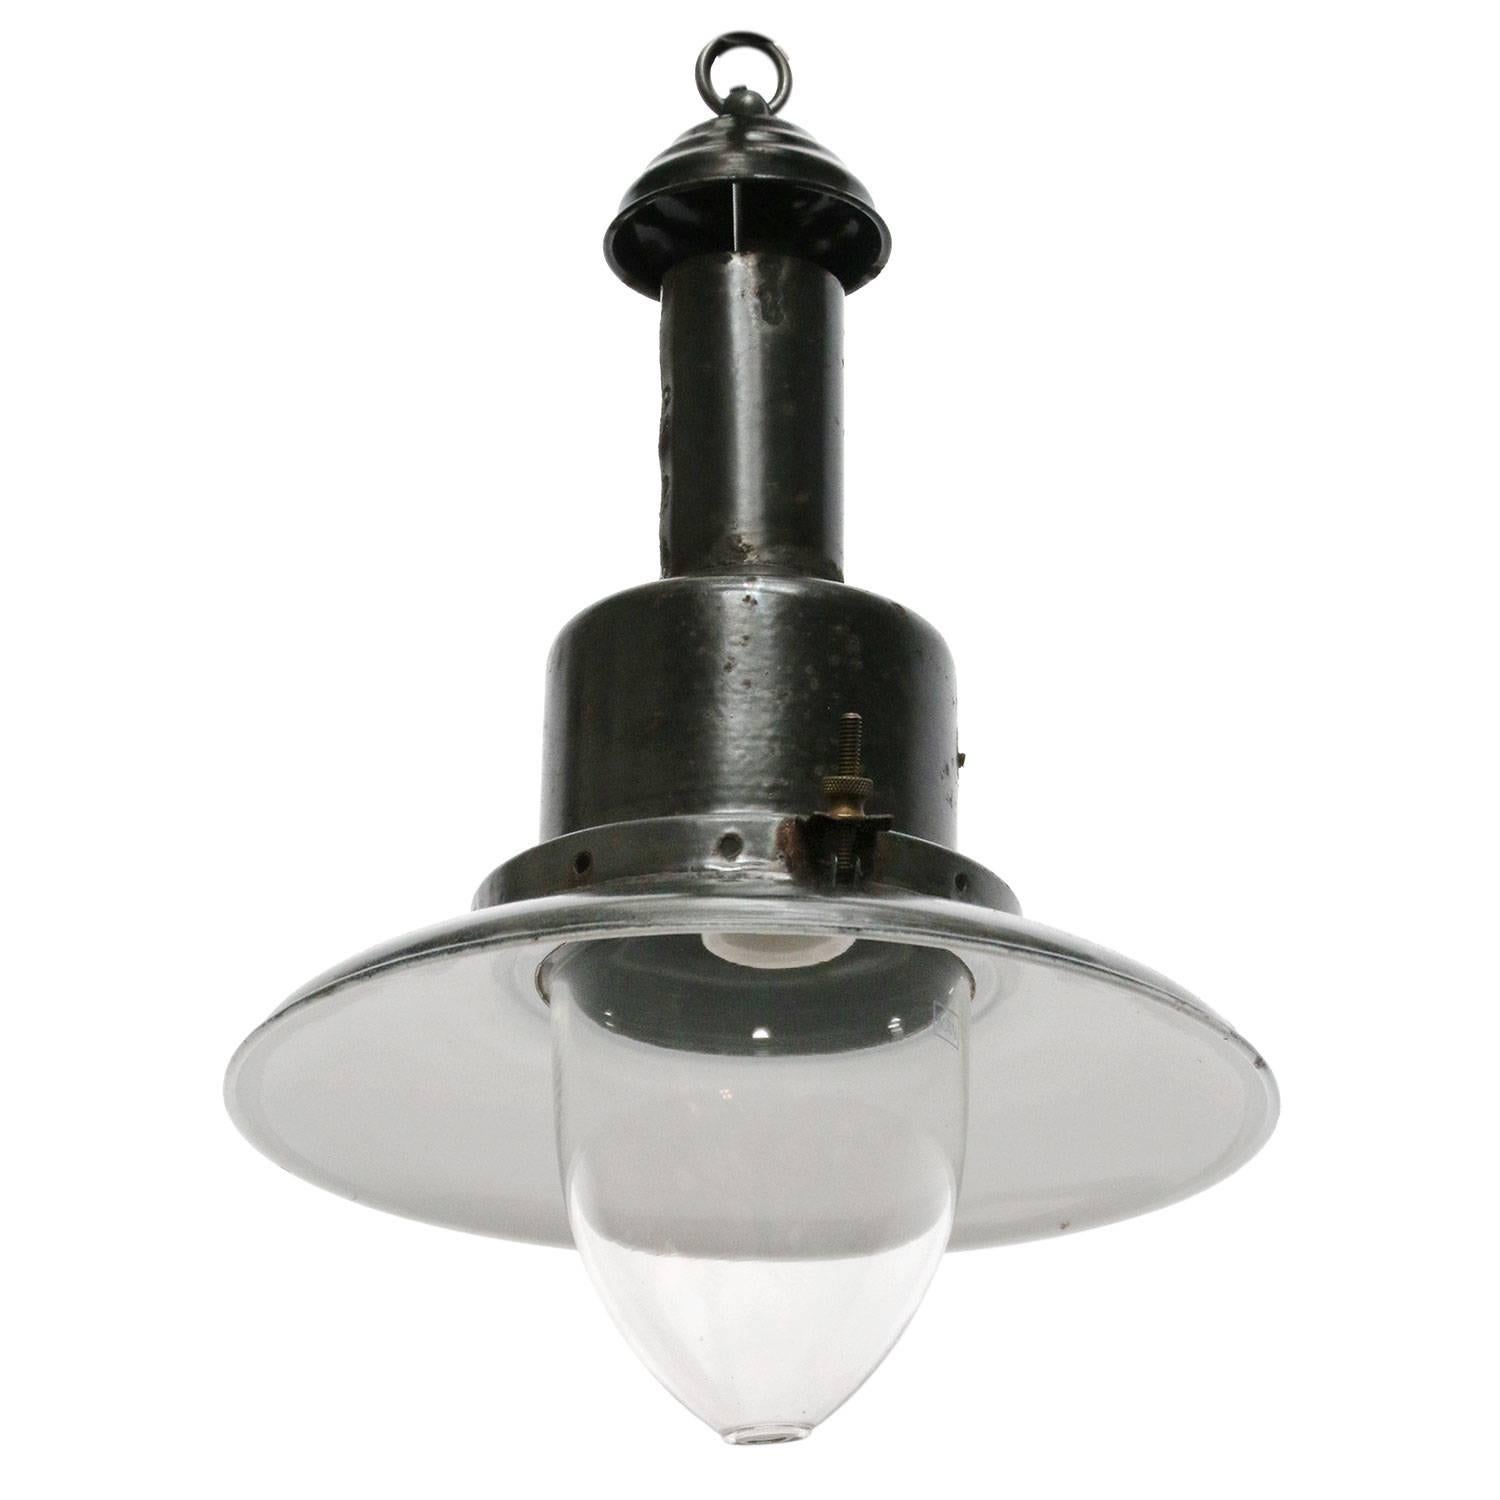 El Greco black 01. Greek fisherman’s light. Black enamel pendant light with clear glass. White interior. Max 150W E27.

Weight: 1.4 kg / 3.1 lb

All lamps have been made suitable by international standards for incandescent light bulbs,